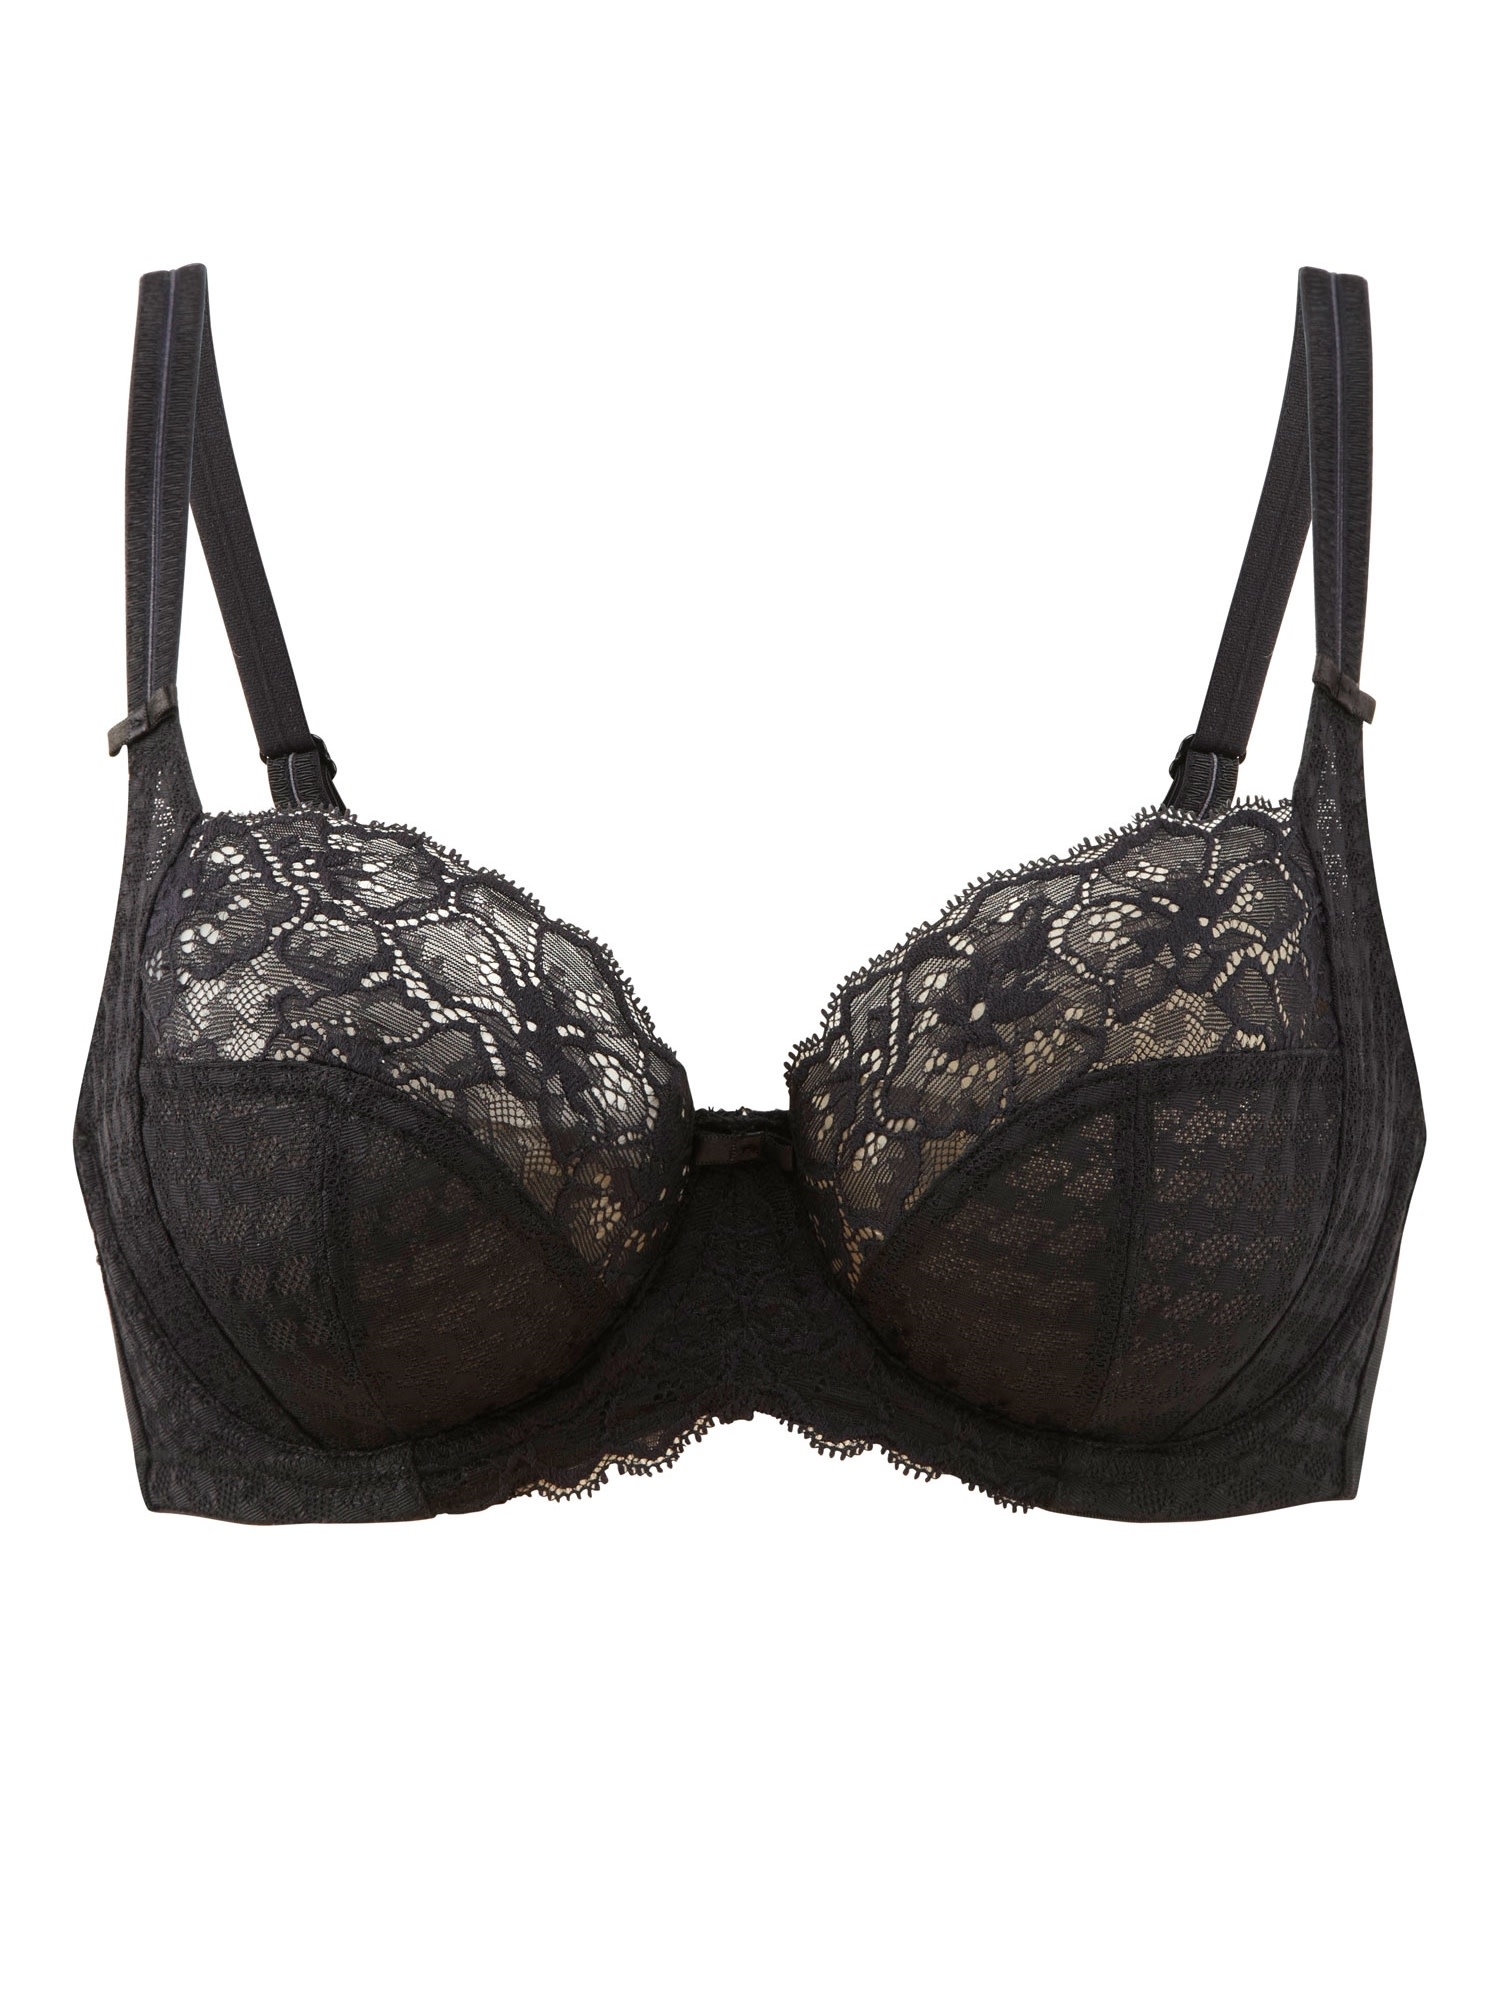 Shop Black Firday CUUP The Balconette - Mesh, Vine Bras at Best Price in